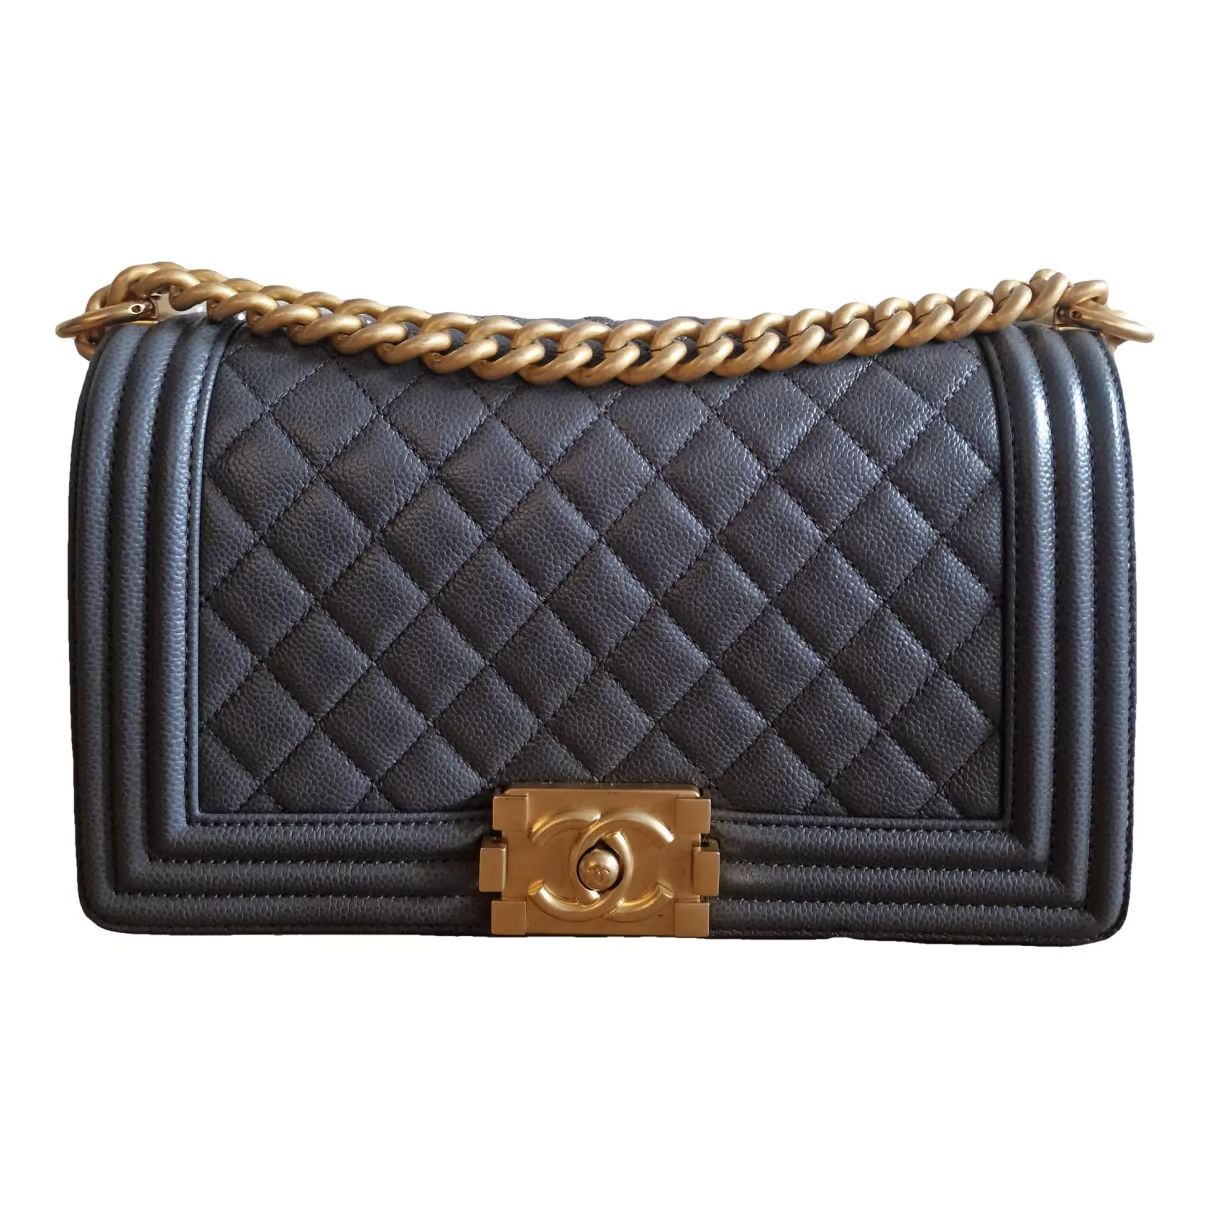 Boy Chanel Handbags | Buy or Sell your Luxury bags for Women - Vestiaire Collective | Vestiaire Collective (Global)